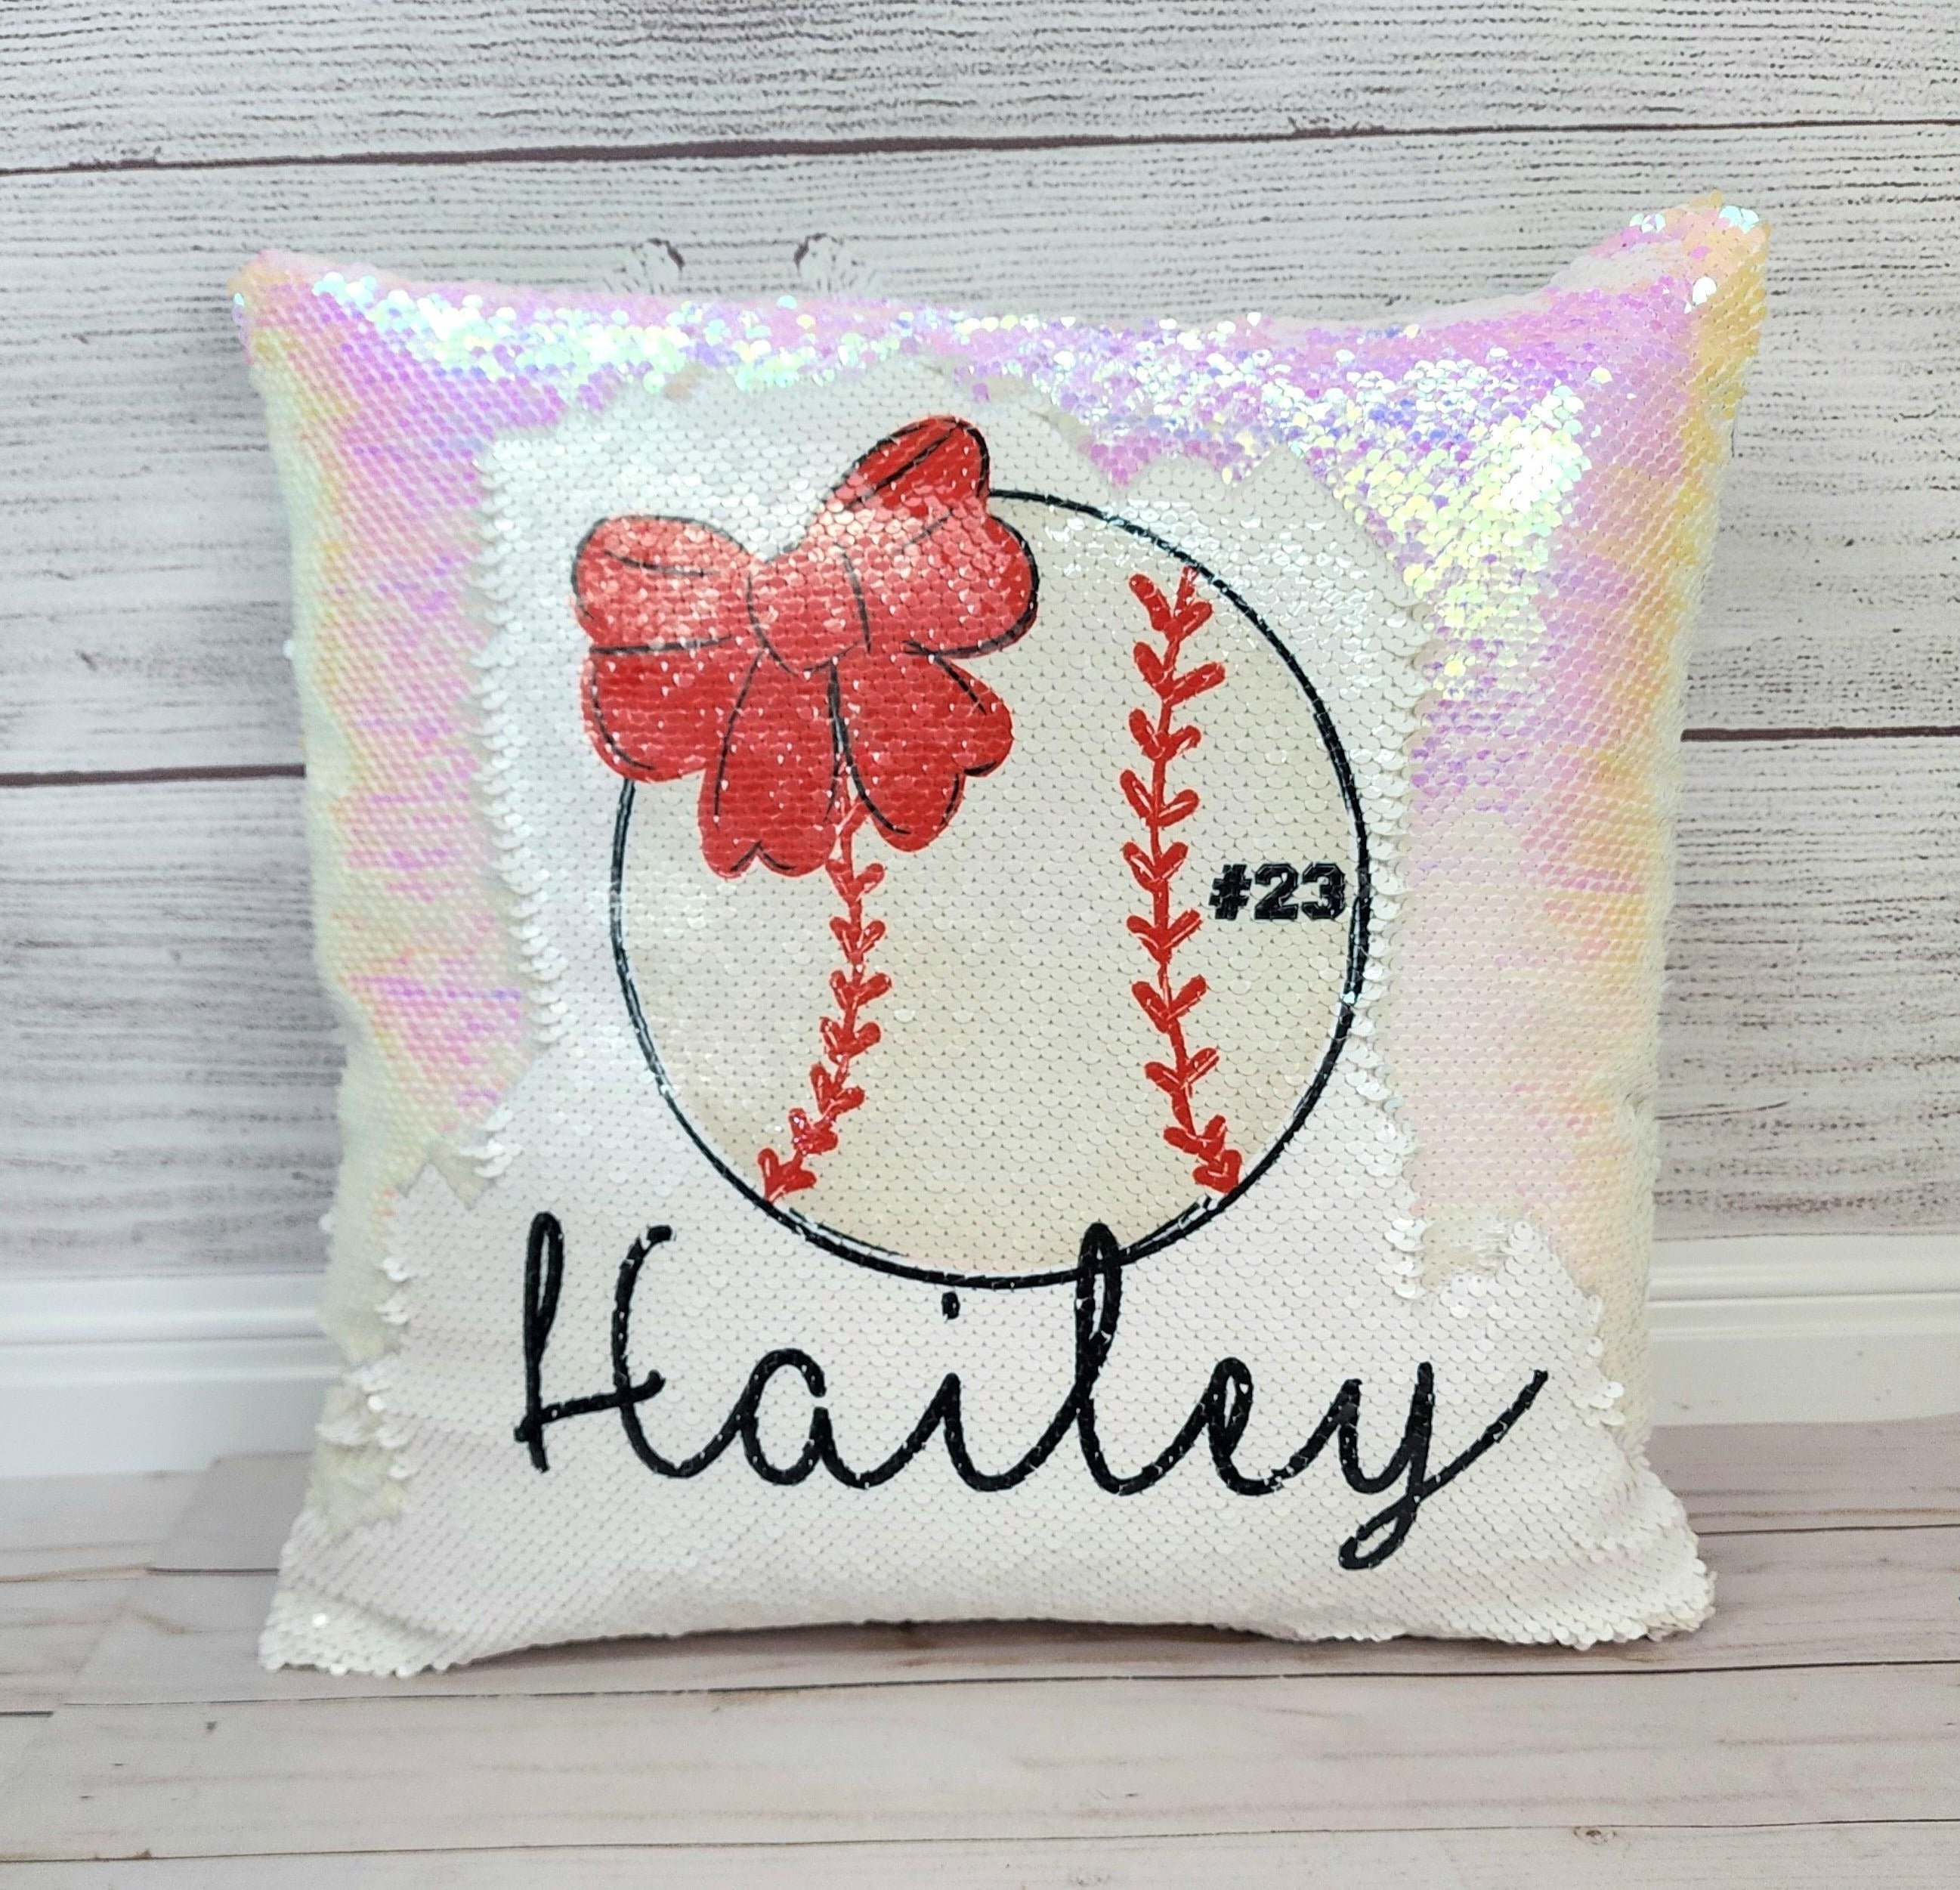 Softball and Sports Birthday Gift for Girls, Softball pillow case personalized Sequin Throw Pillowcase Custom Reversible Pillow Decorative Cushion Pillow Cover lover gift | Gift for child with Sensory Needs and or Autism | Gift for 5 year old Girls | Gift for Girls | Gift for 2 3 4 5 6 year old girls | Personalized Sequin Decor | Birthday Girl Gift Personalized Pillow for Girls | Gift for Birthday Theme Party Supplies